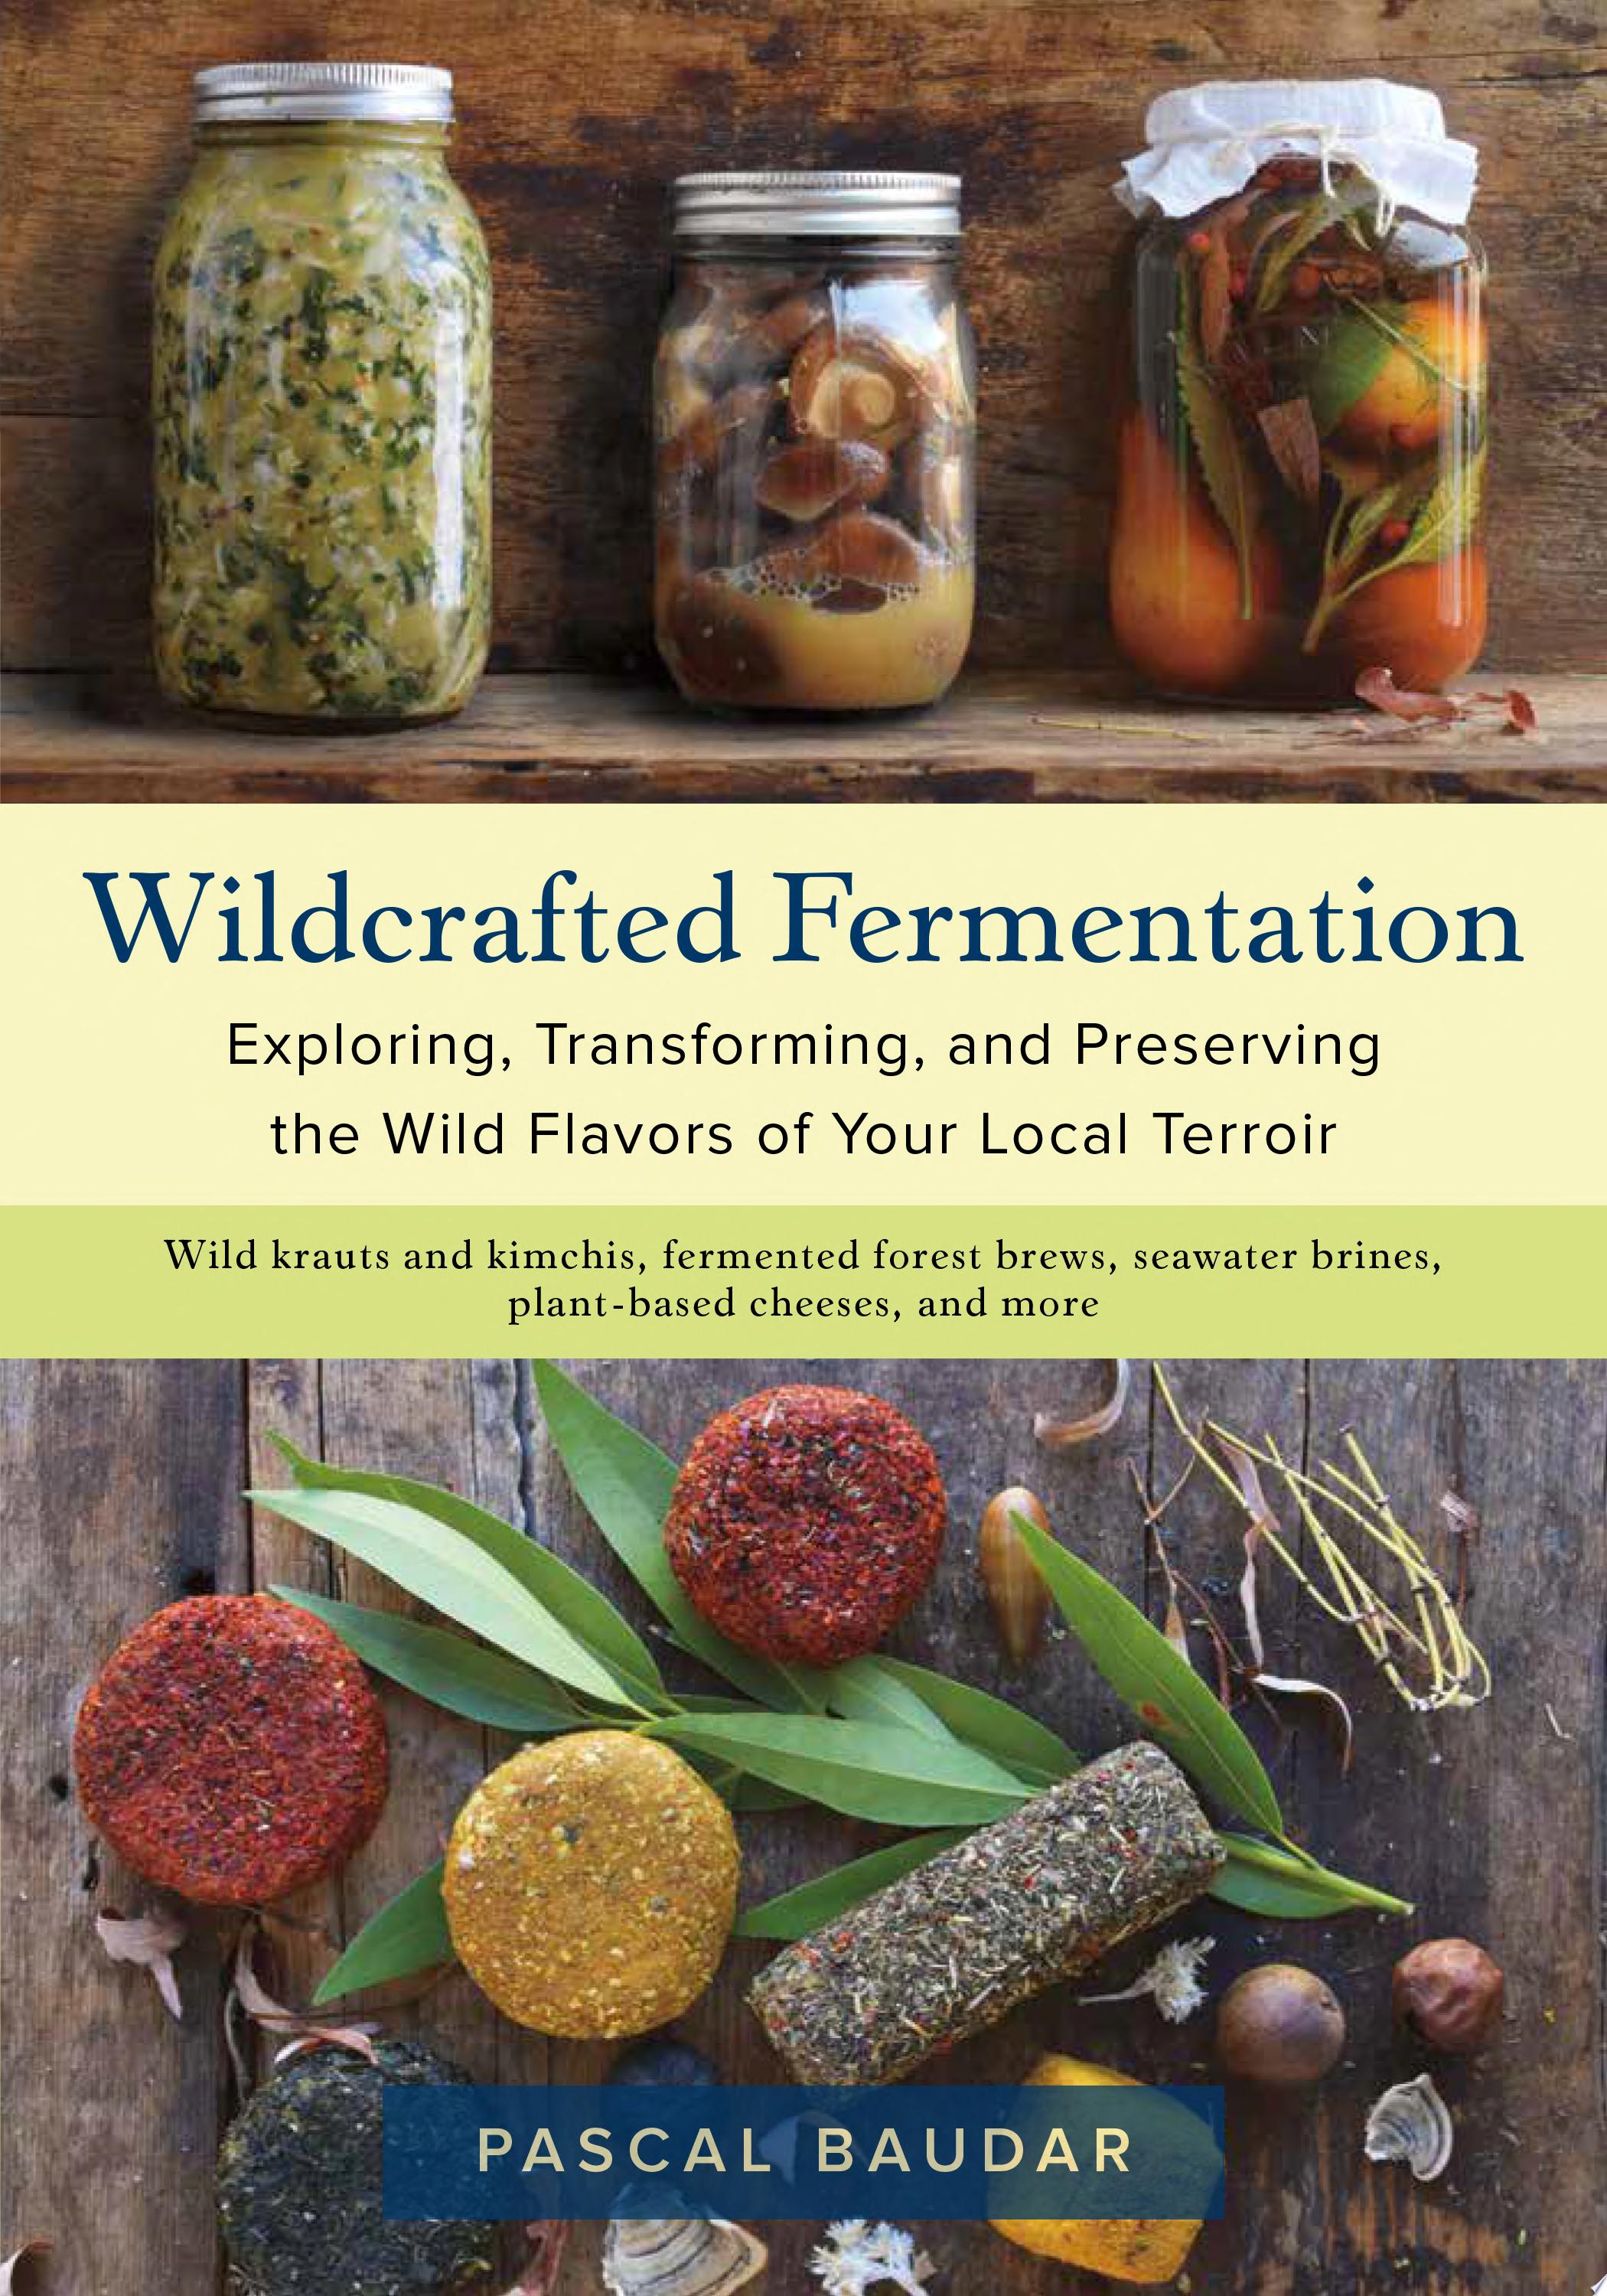 Image for "Wildcrafted Fermentation"